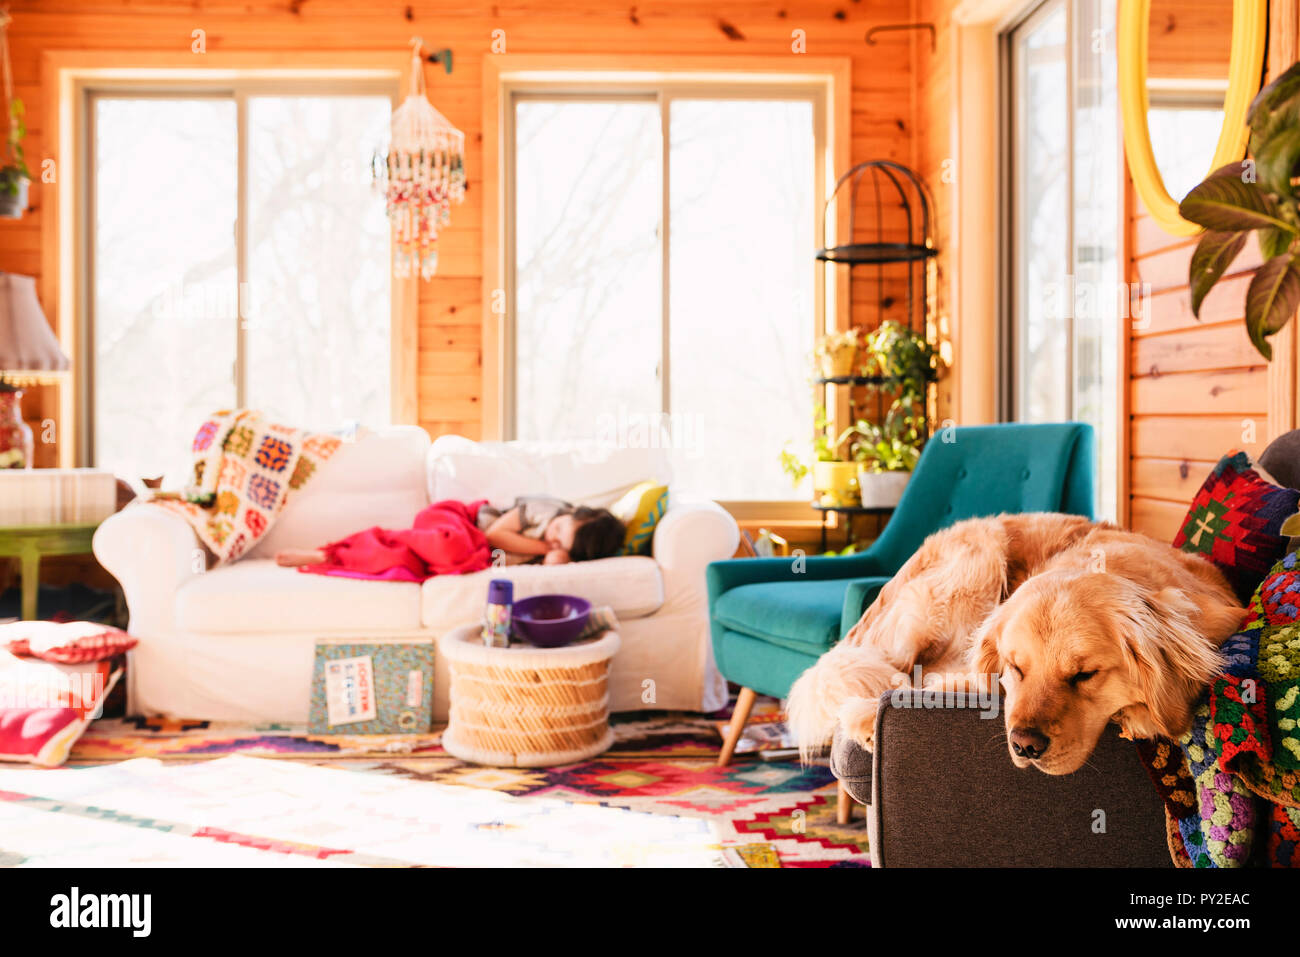 Girl and her dog sleeping on couches in the living room Stock Photo